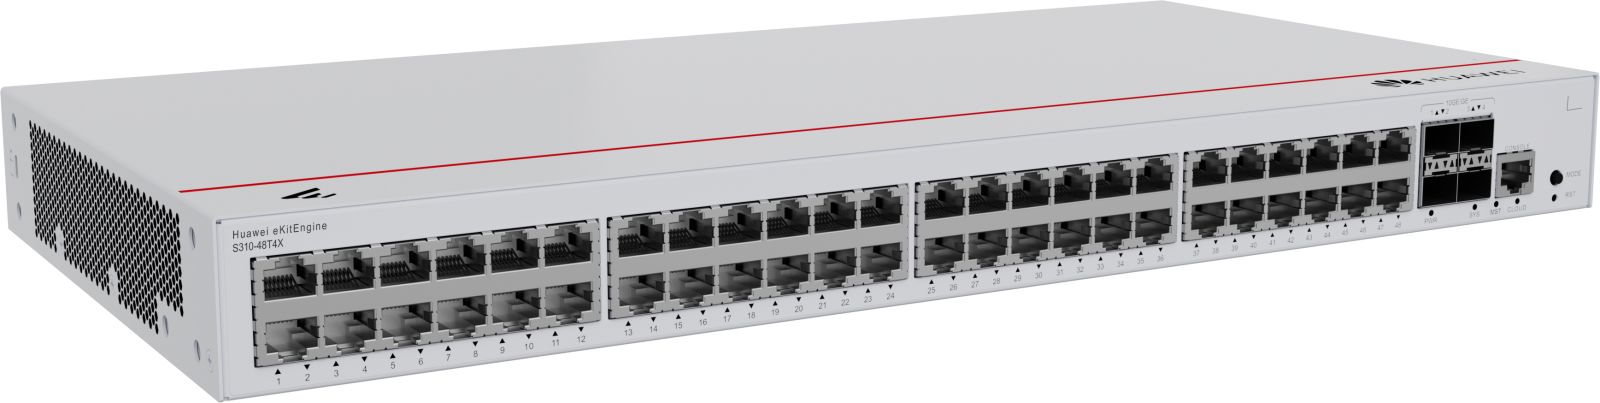 Levně Huawei S310-48T4XS witch (48*10/100/1000BASE-T ports, 4*10GE SFP+ ports, built-in AC power)